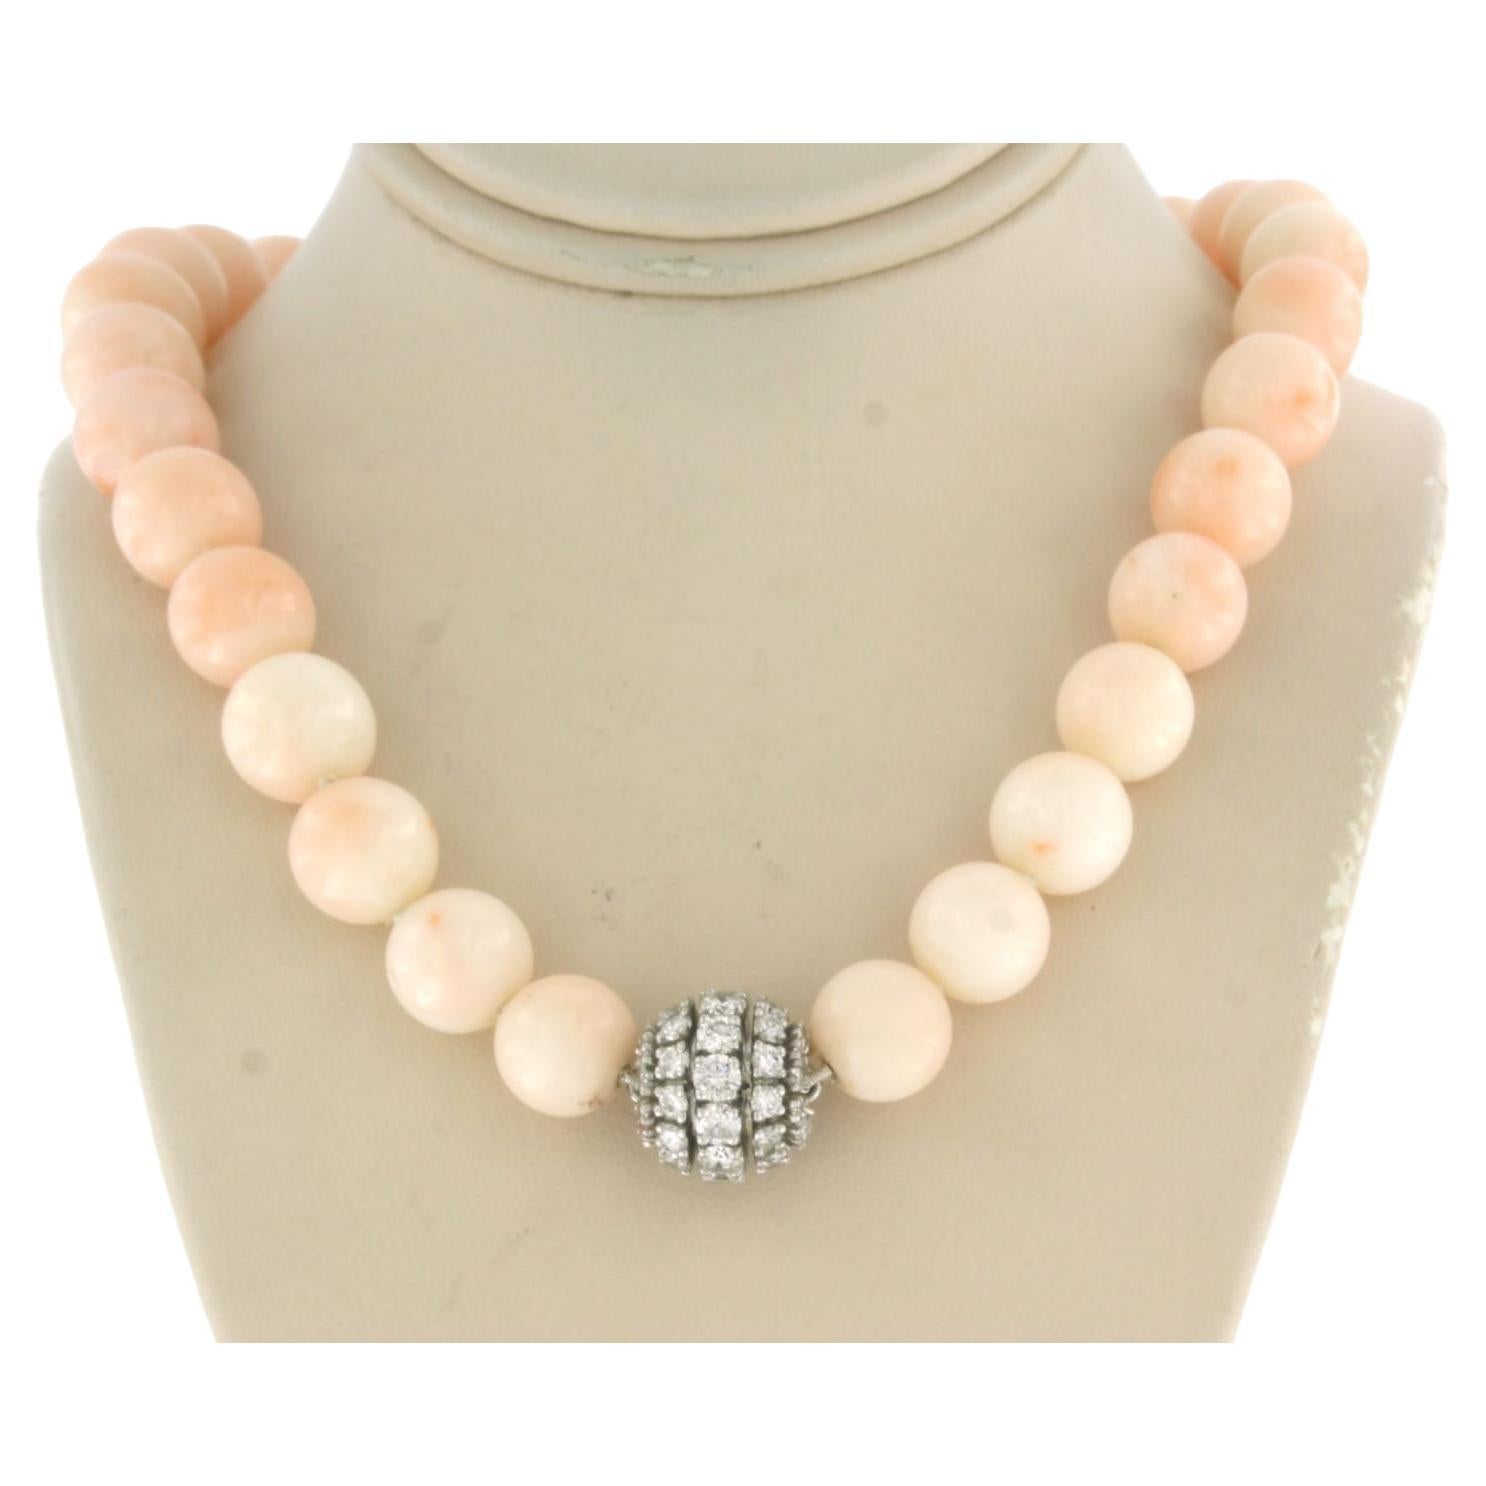 Coral bead necklace on a 18k white gold lock set with diamonds For Sale ...